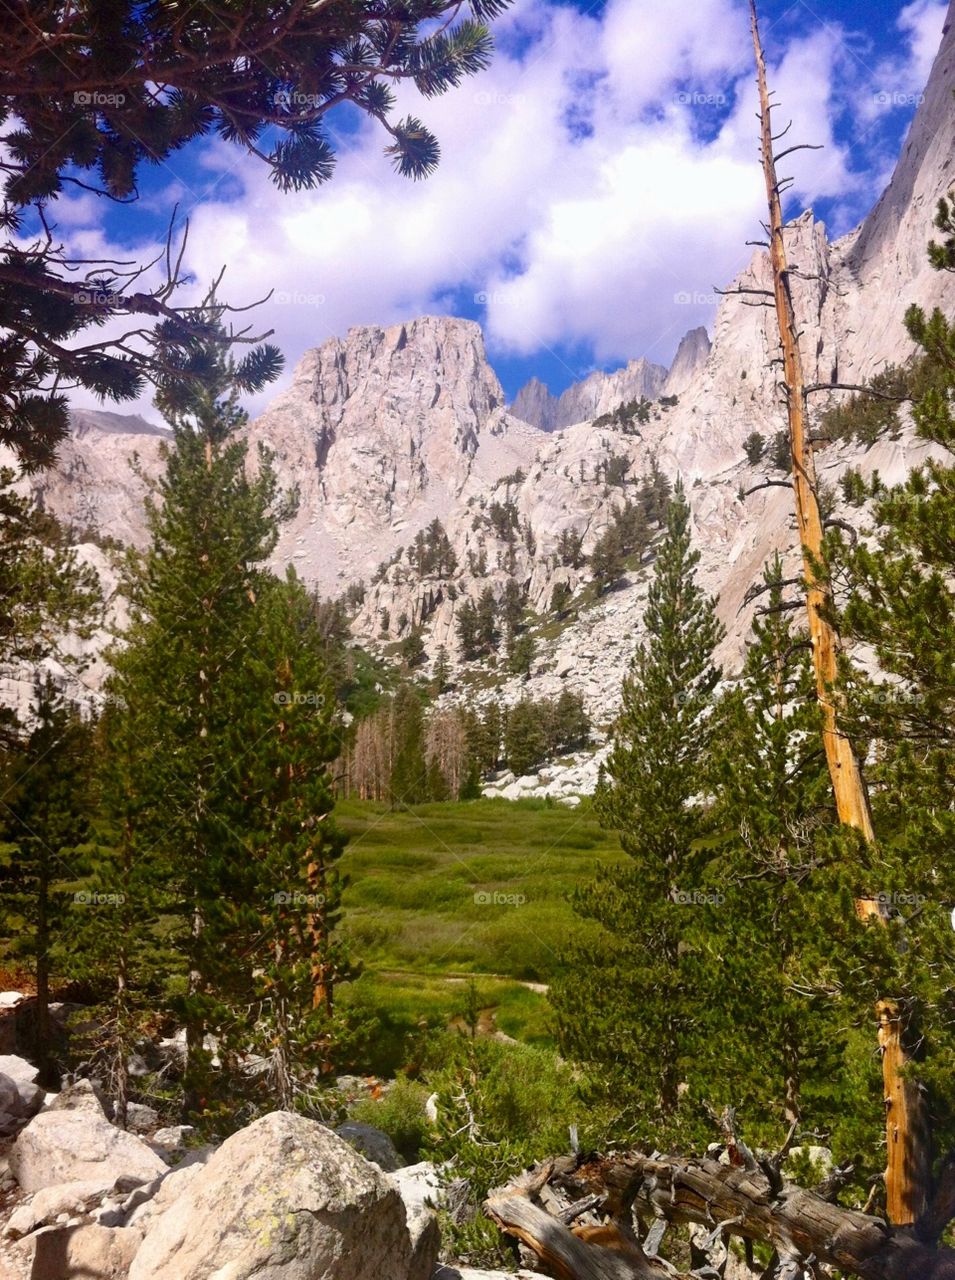 On the trail to ascend Mount Whitney, the tallest mountain in the “Lower 48.” Two day backpacking trek.